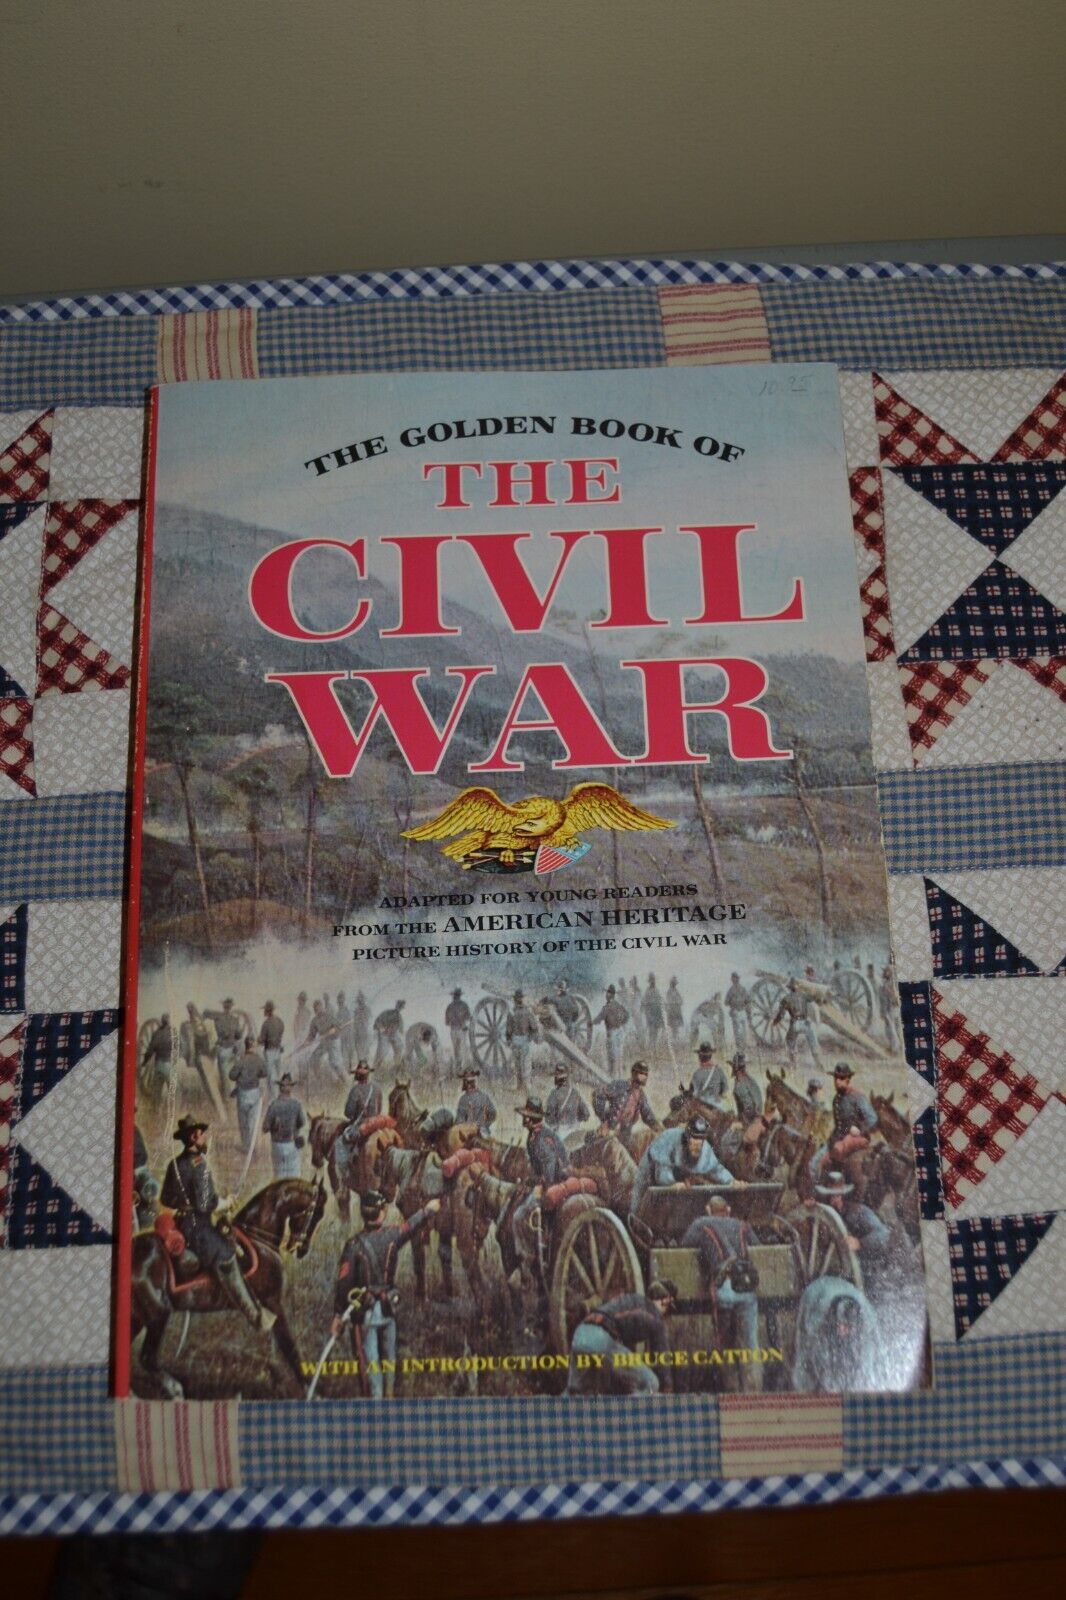 The Golden Book of The Civil War, American Heritage Picture History 1961 Vintage